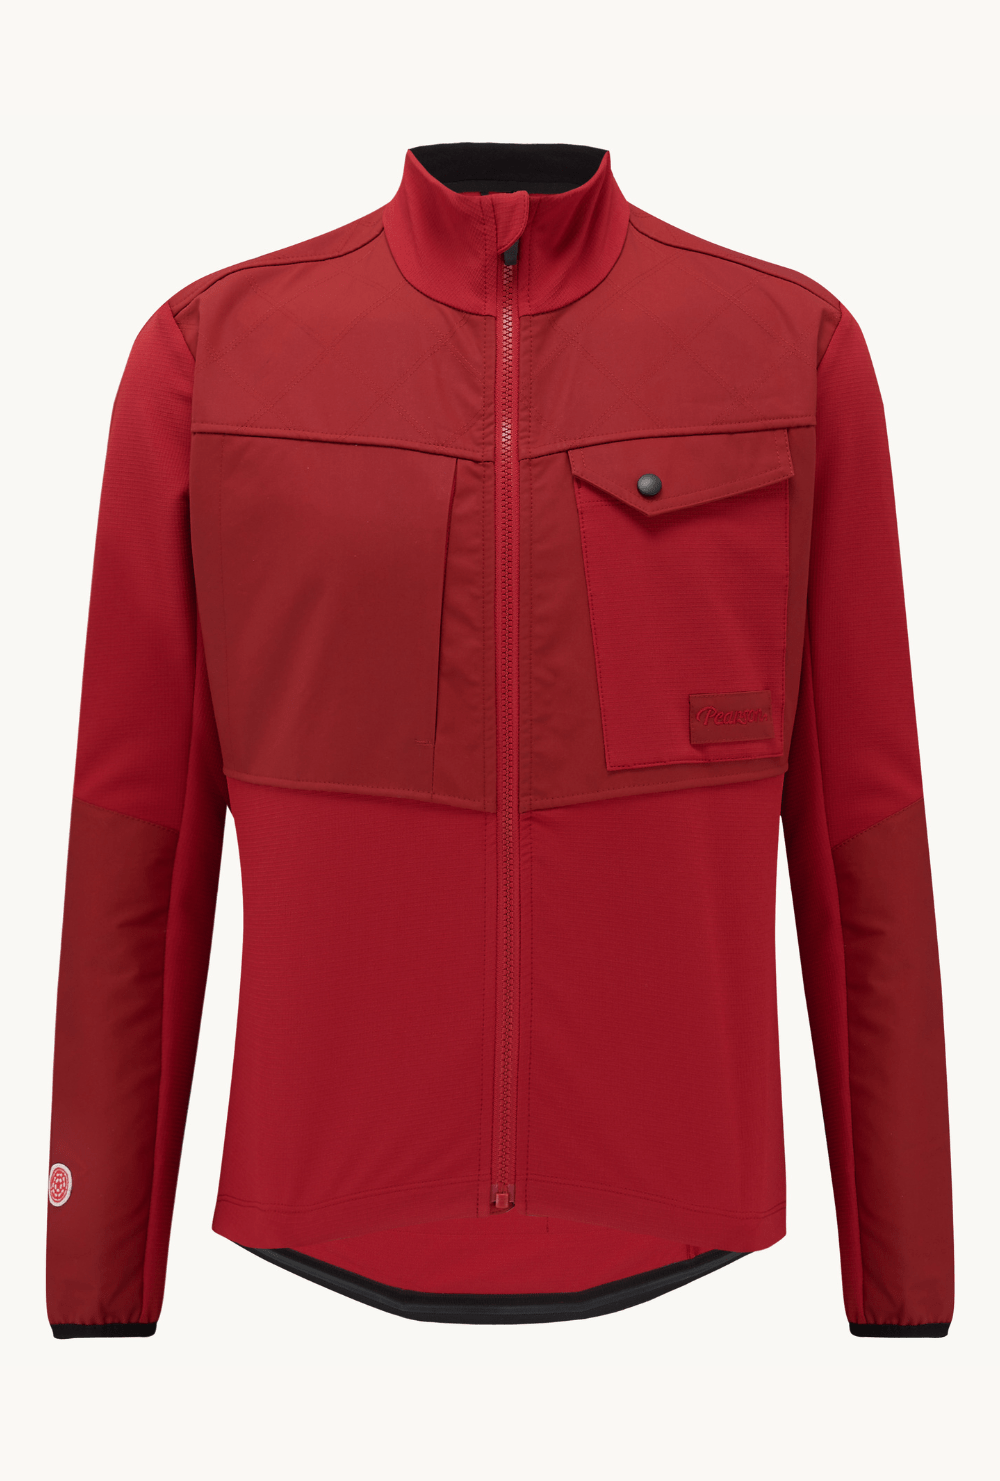 Pearson 1860  Because Its There - Red Adventure Long Sleeve Cycling Jacket  Cherry Red / Large